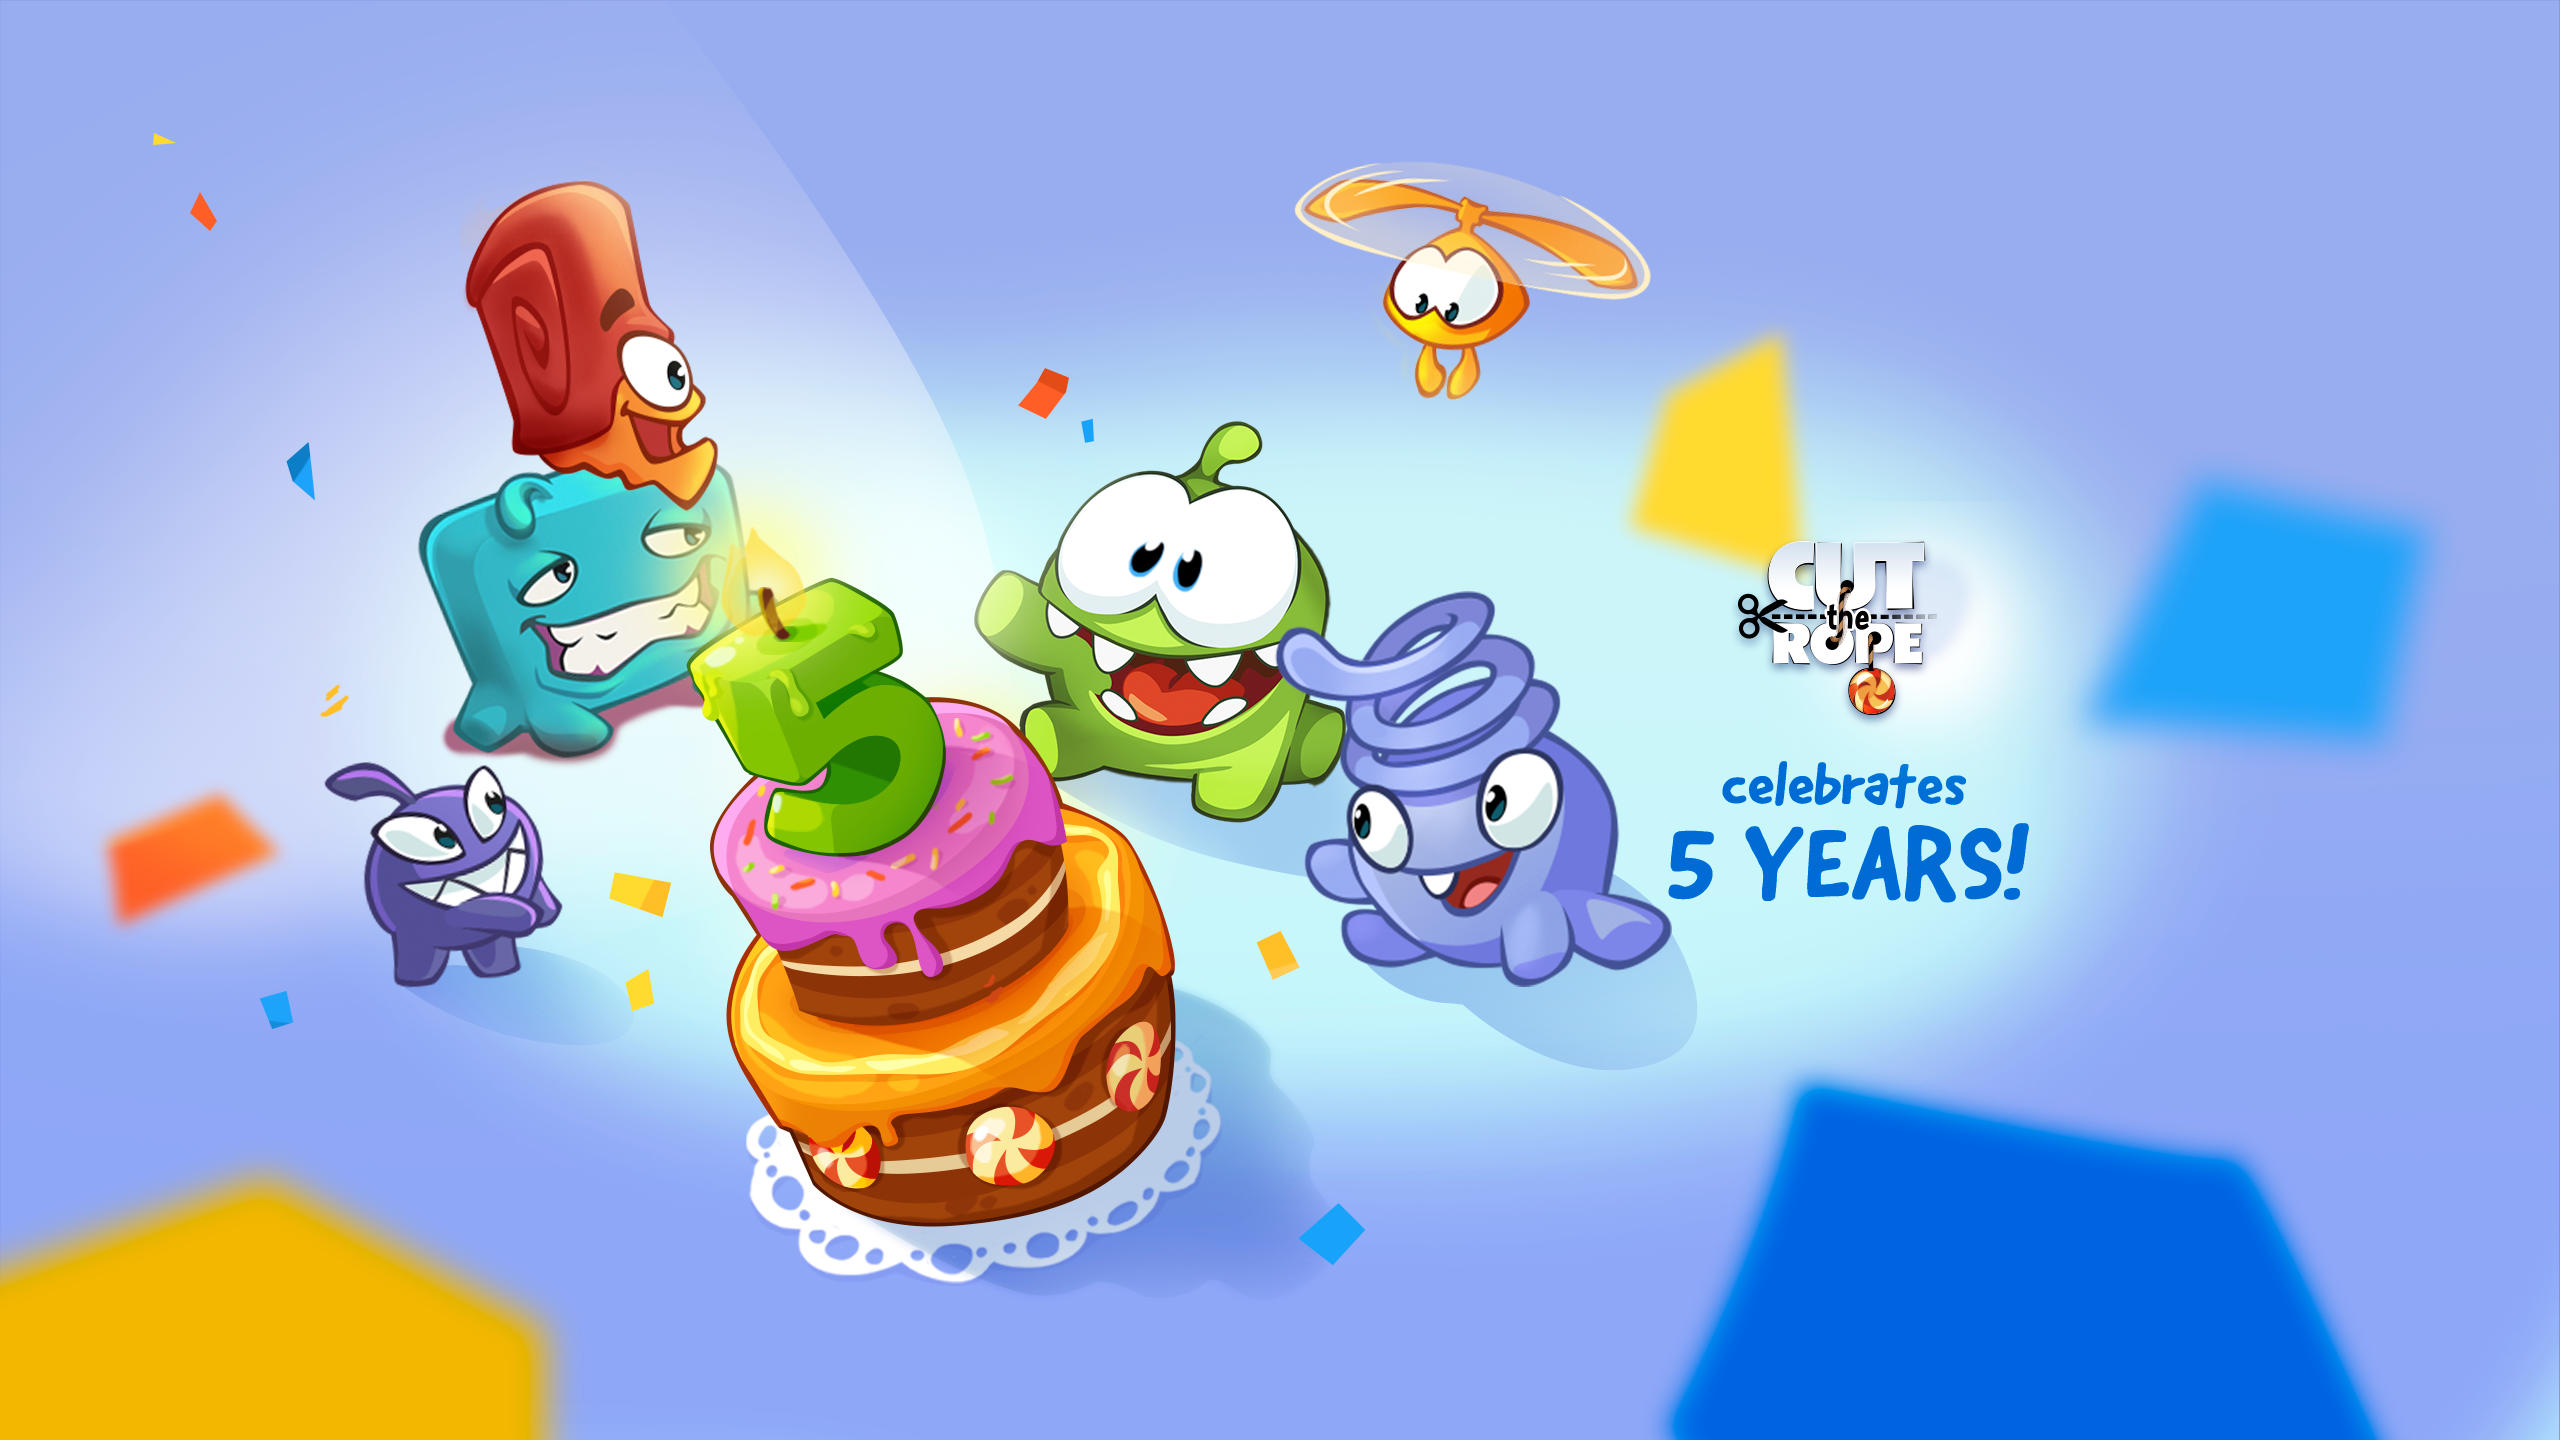 Om Nom is back, and still hungry: New 'Cut the Rope' set for December